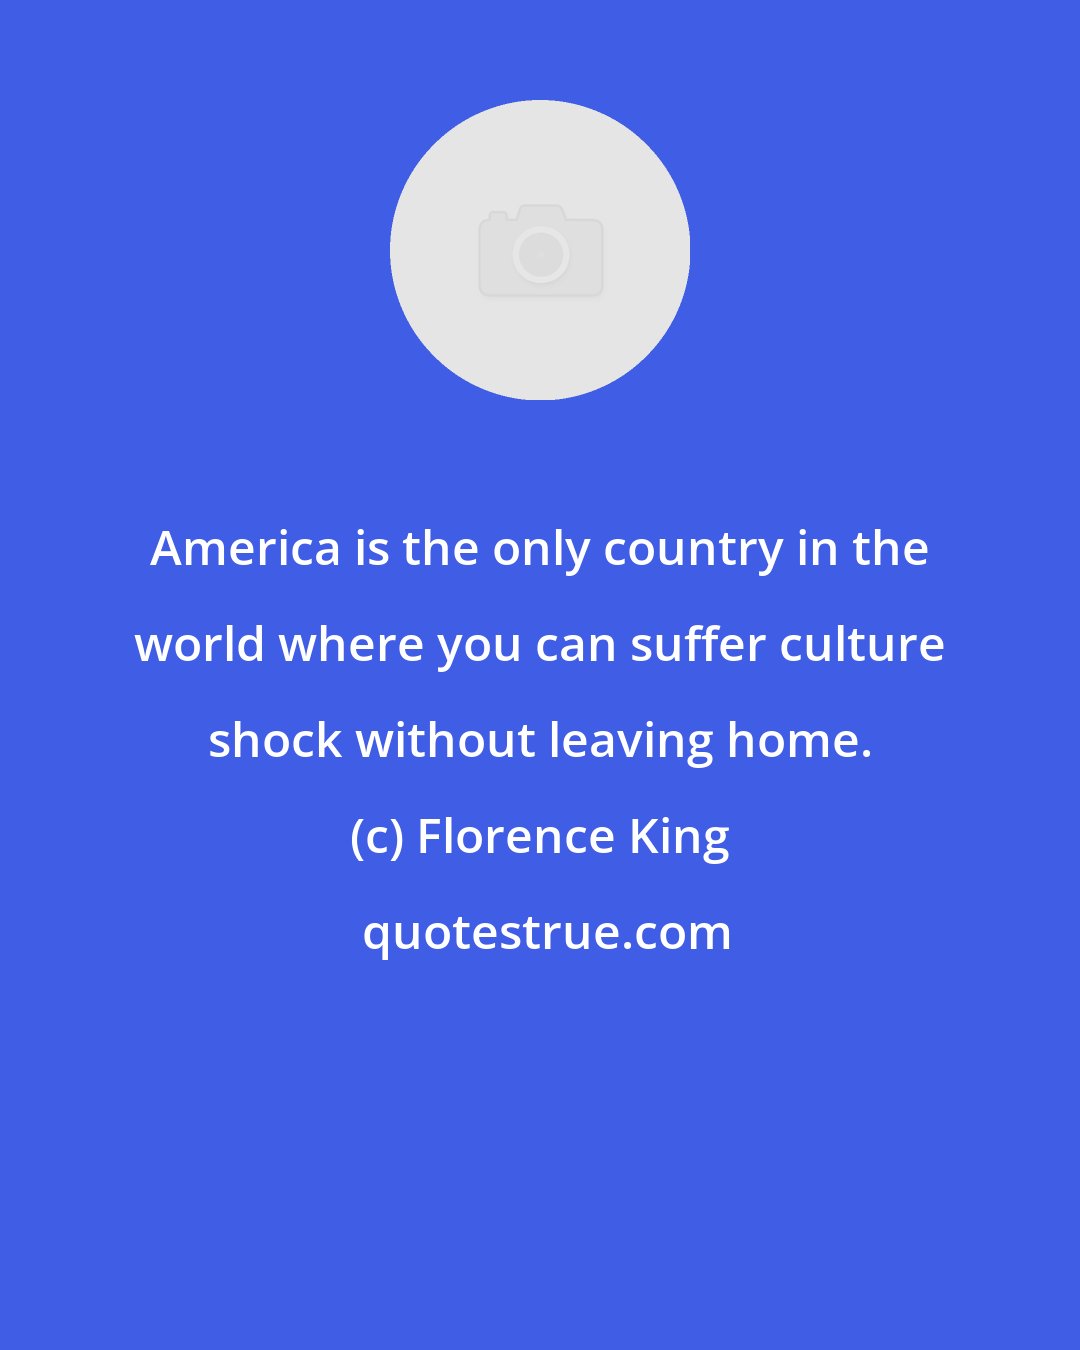 Florence King: America is the only country in the world where you can suffer culture shock without leaving home.